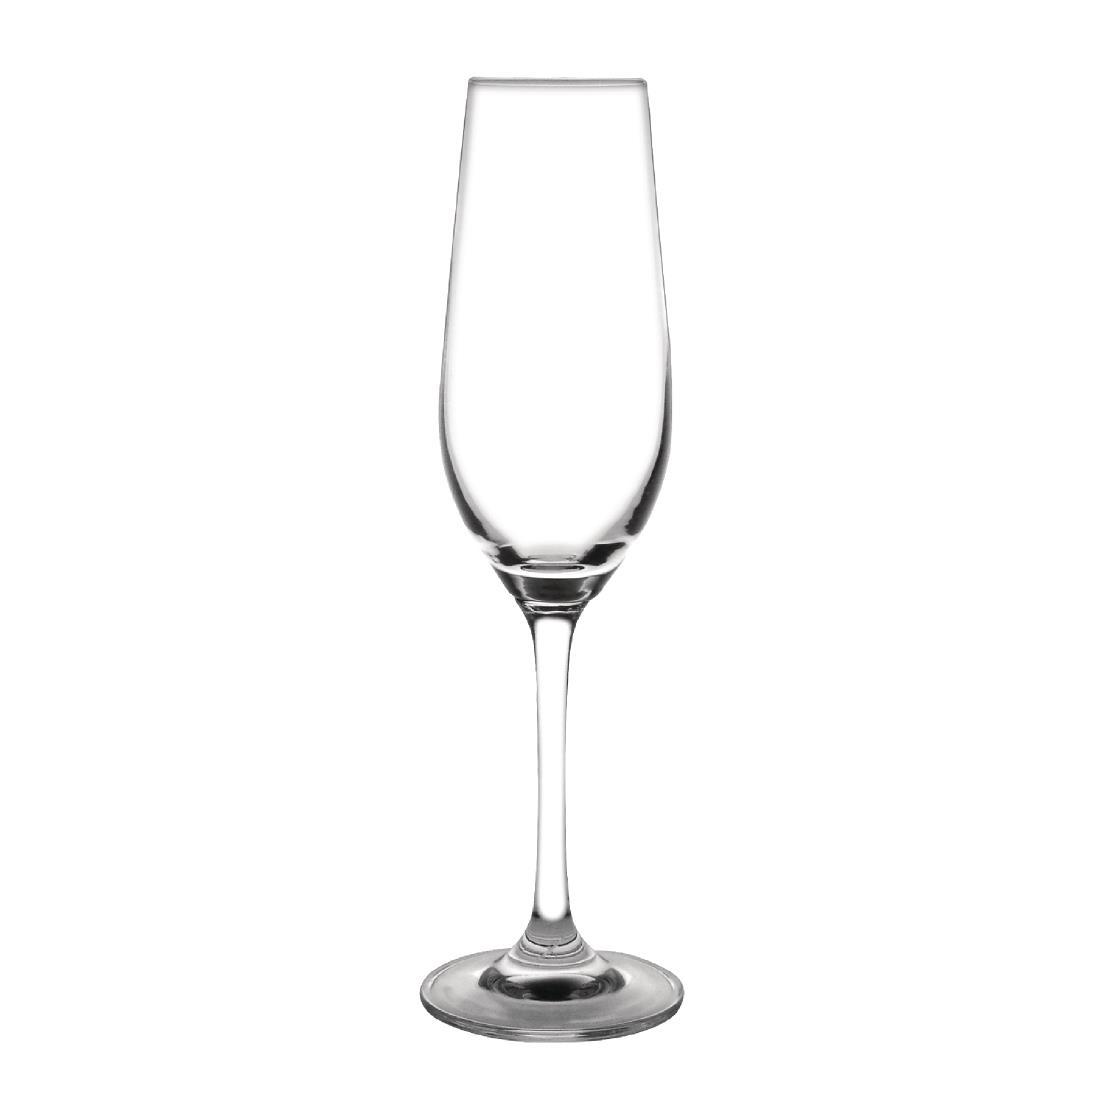 Olympia Chime Crystal Champagne Flutes 225ml (Pack of 6) - GF736  - 1